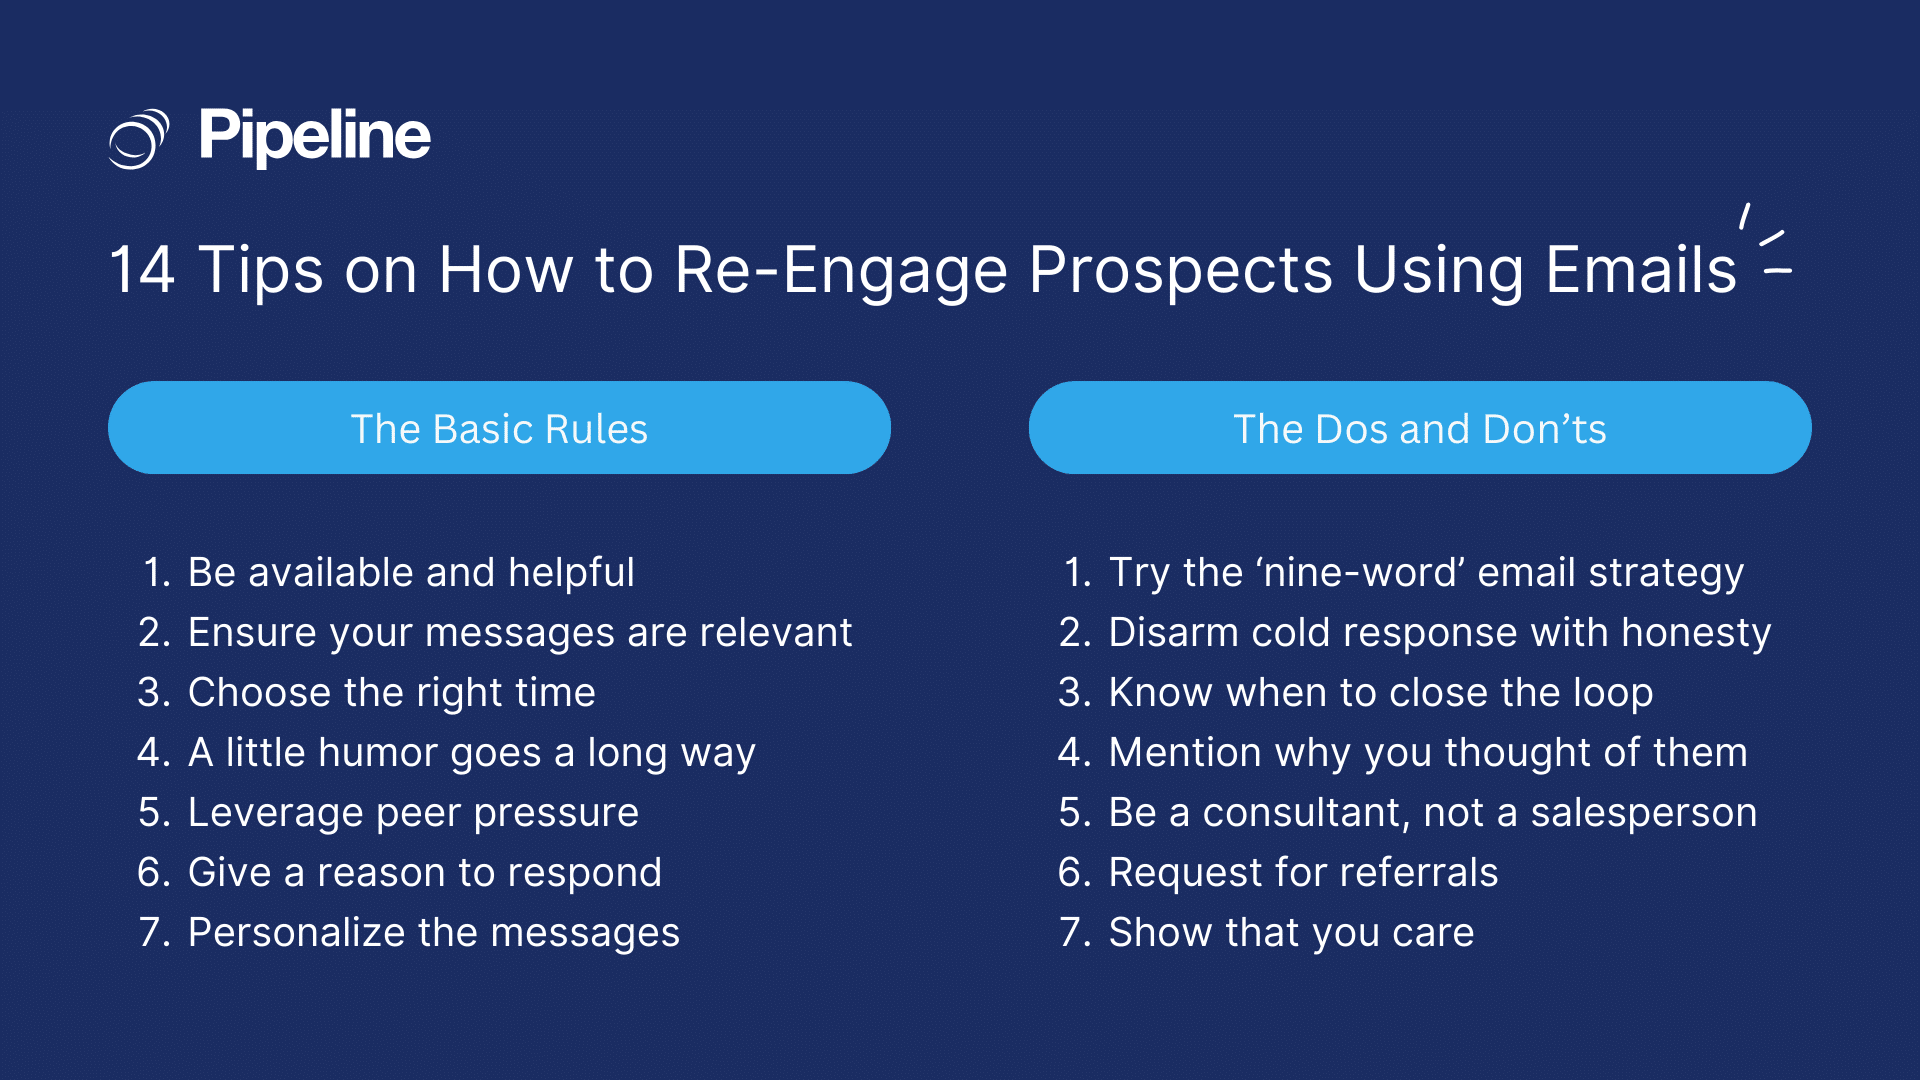 14 Tips on How to Re-Engage Prospects Using Emails